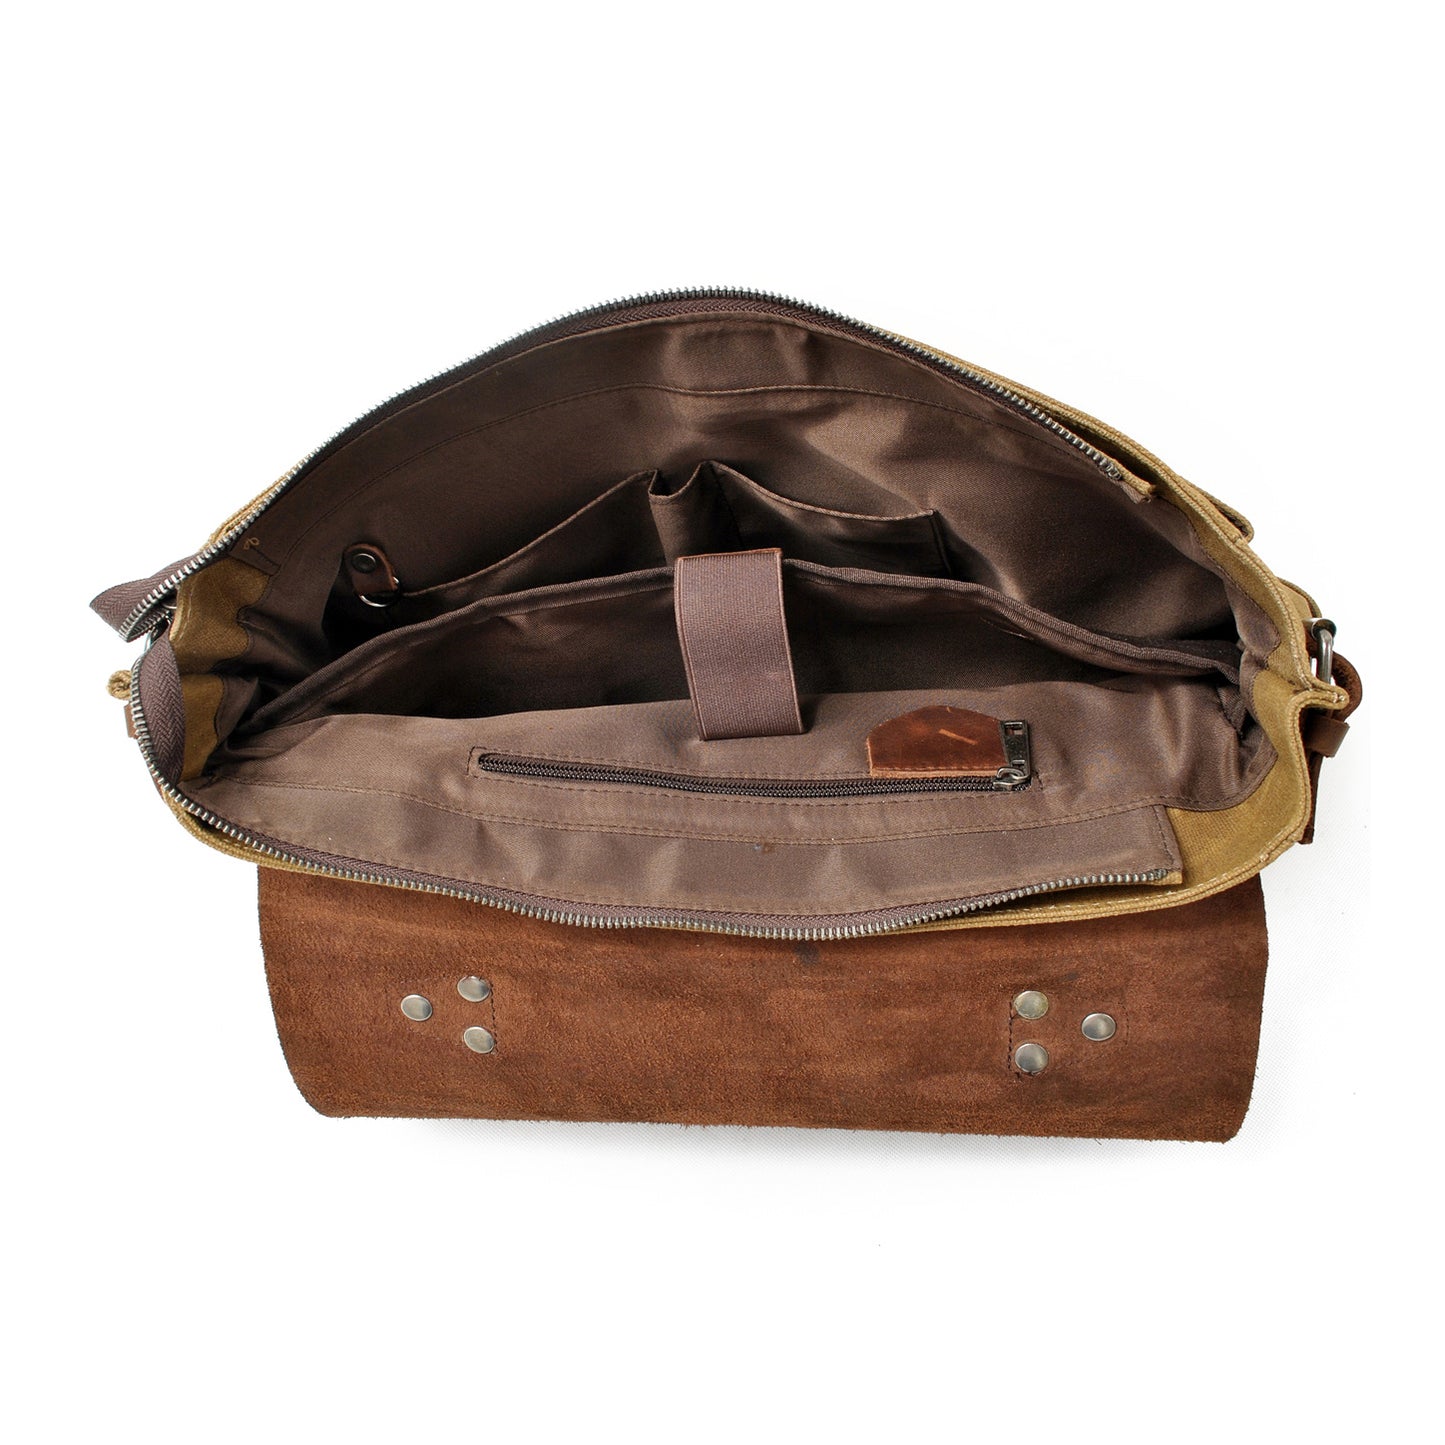 Vintage-Waxed-Canvas-and-Crazy-Horse-Leather-Laptop-Messenger-Bag-Khaki-i7bags-6